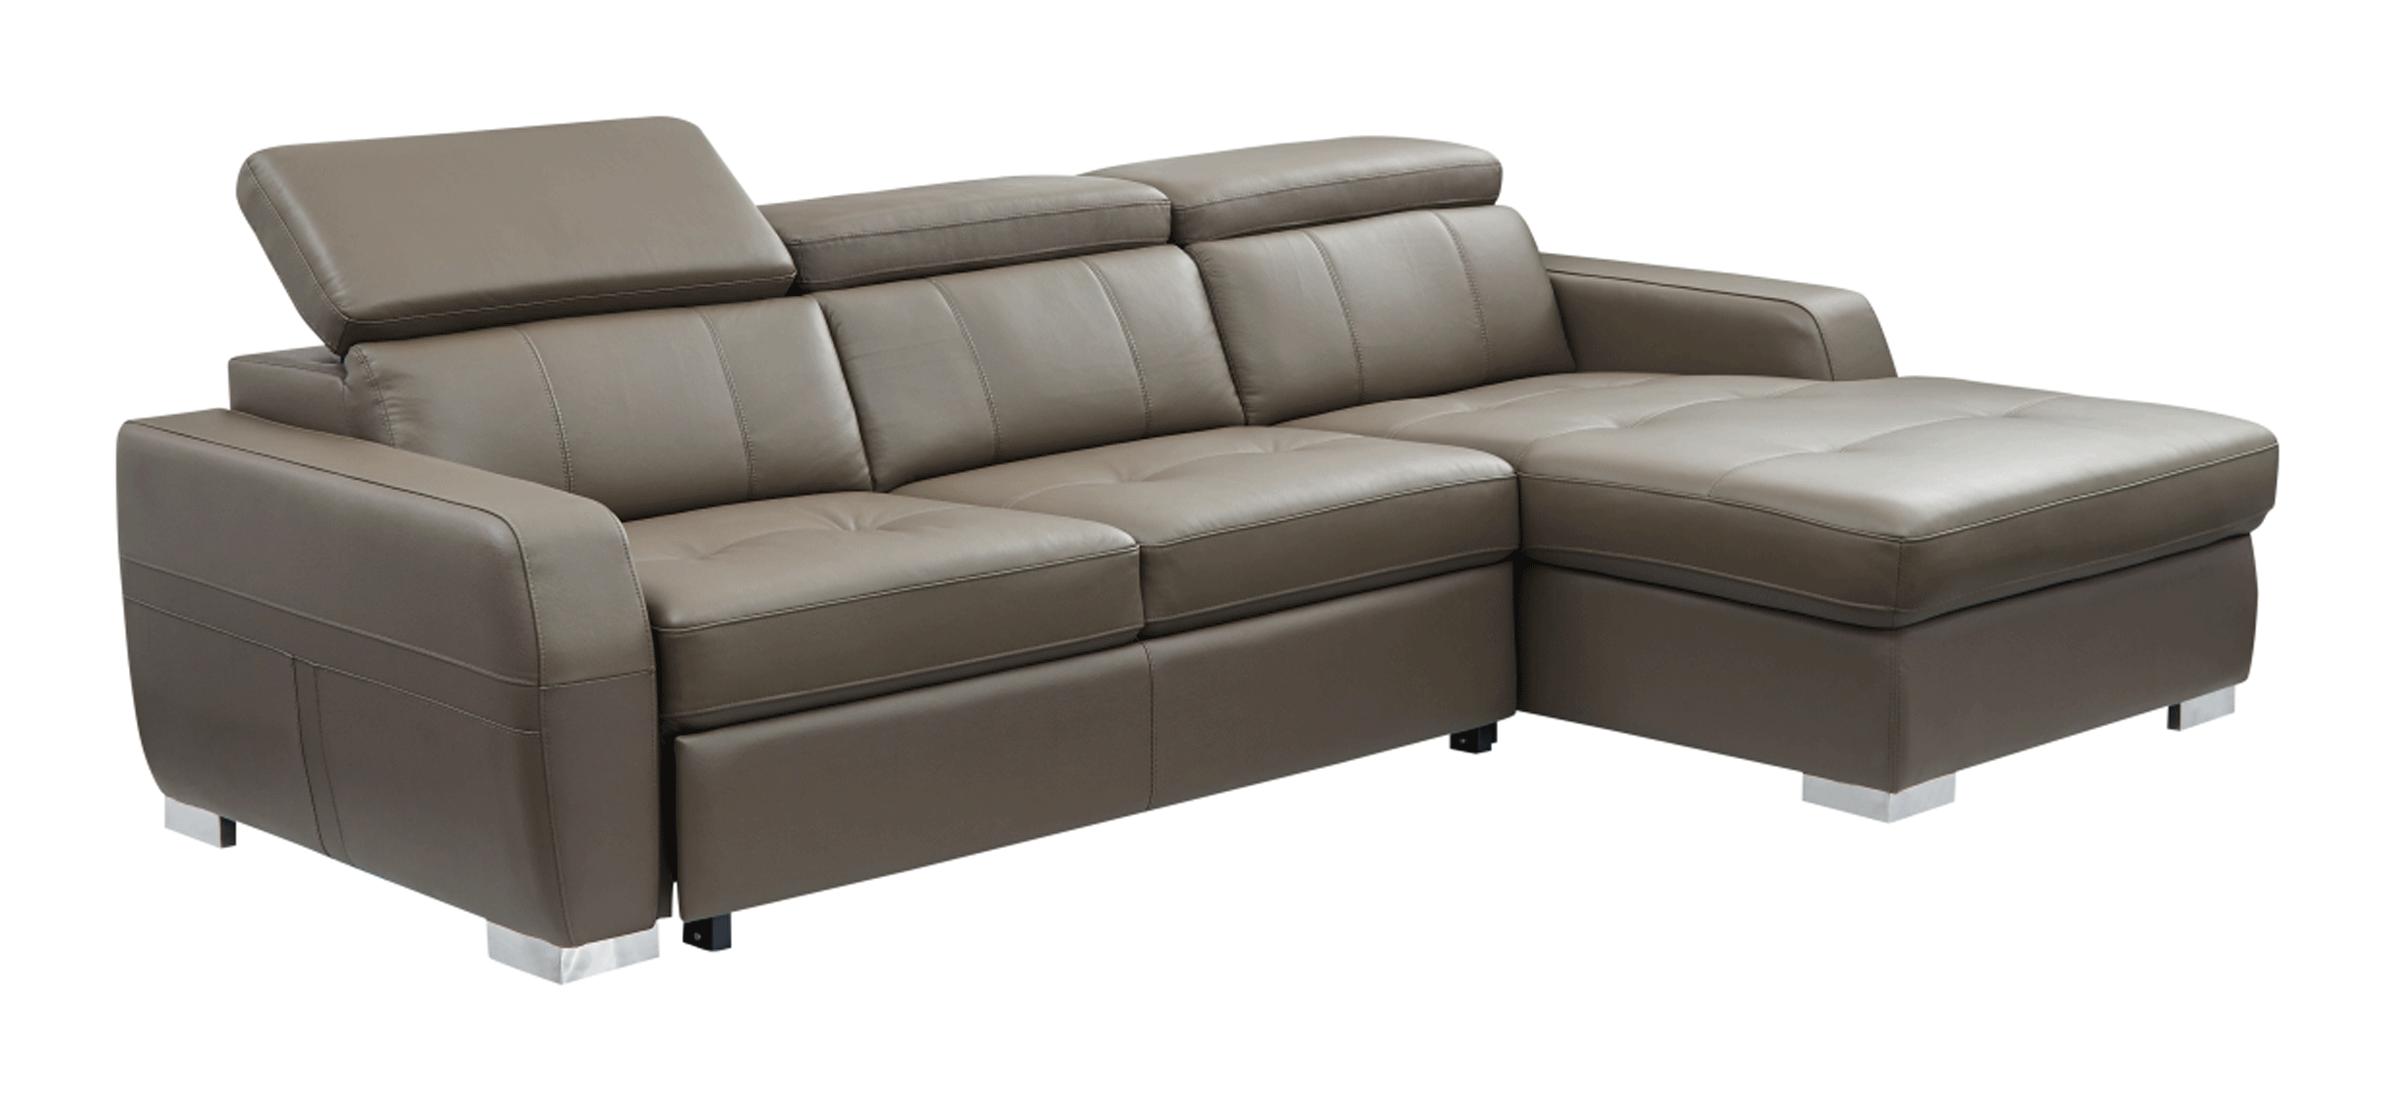 ESF 1822 Sectional Sofa Bed